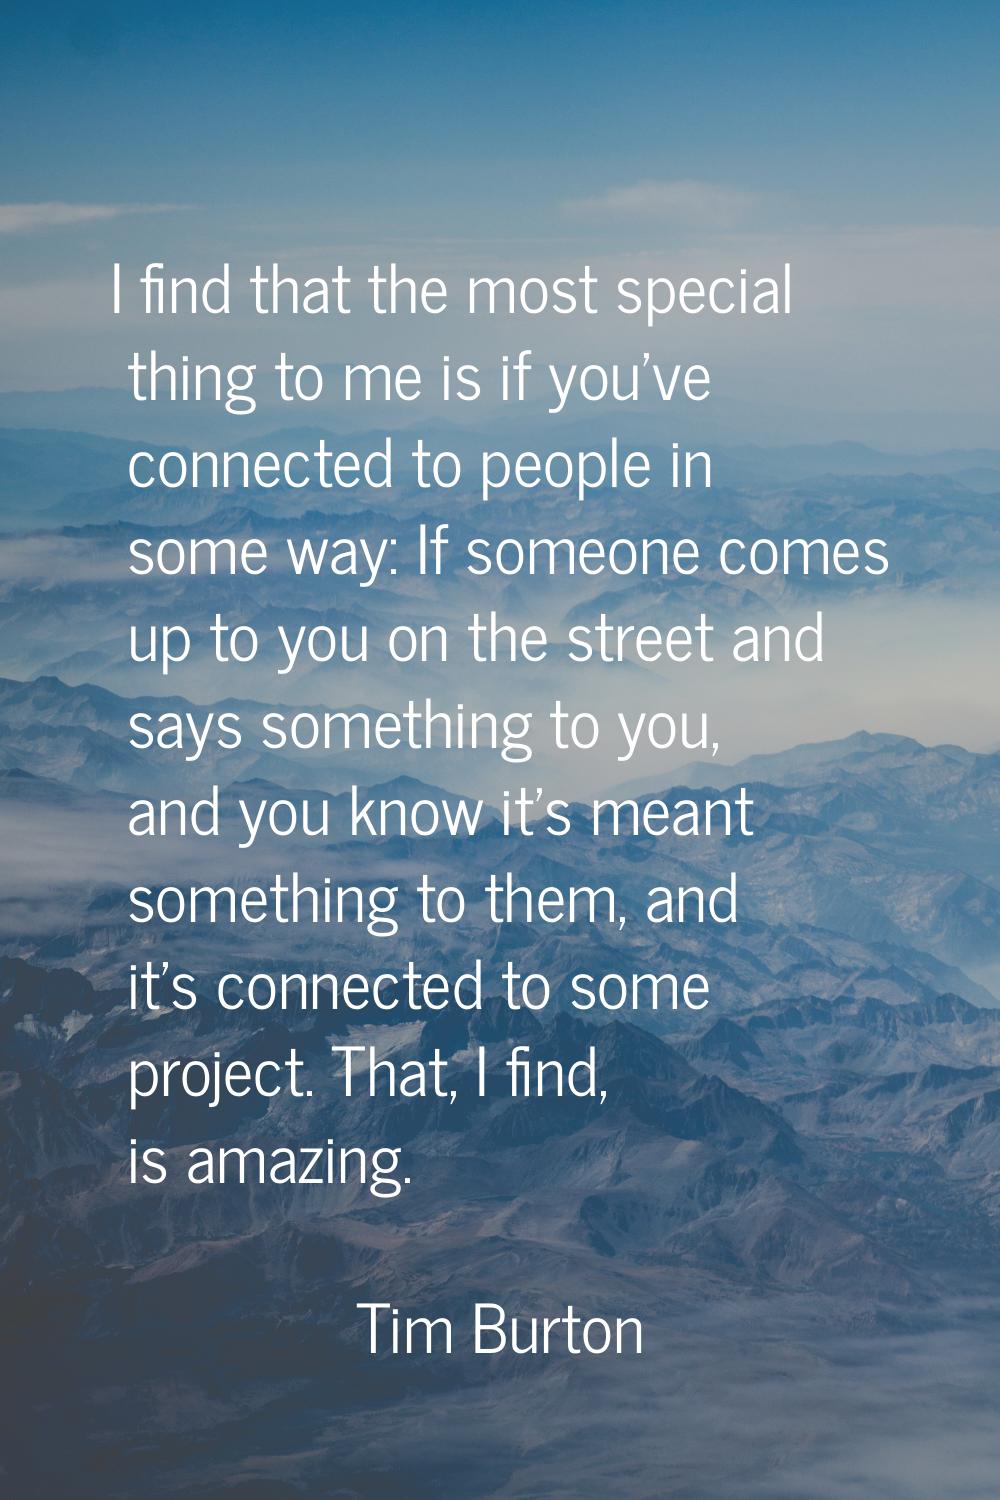 I find that the most special thing to me is if you've connected to people in some way: If someone c